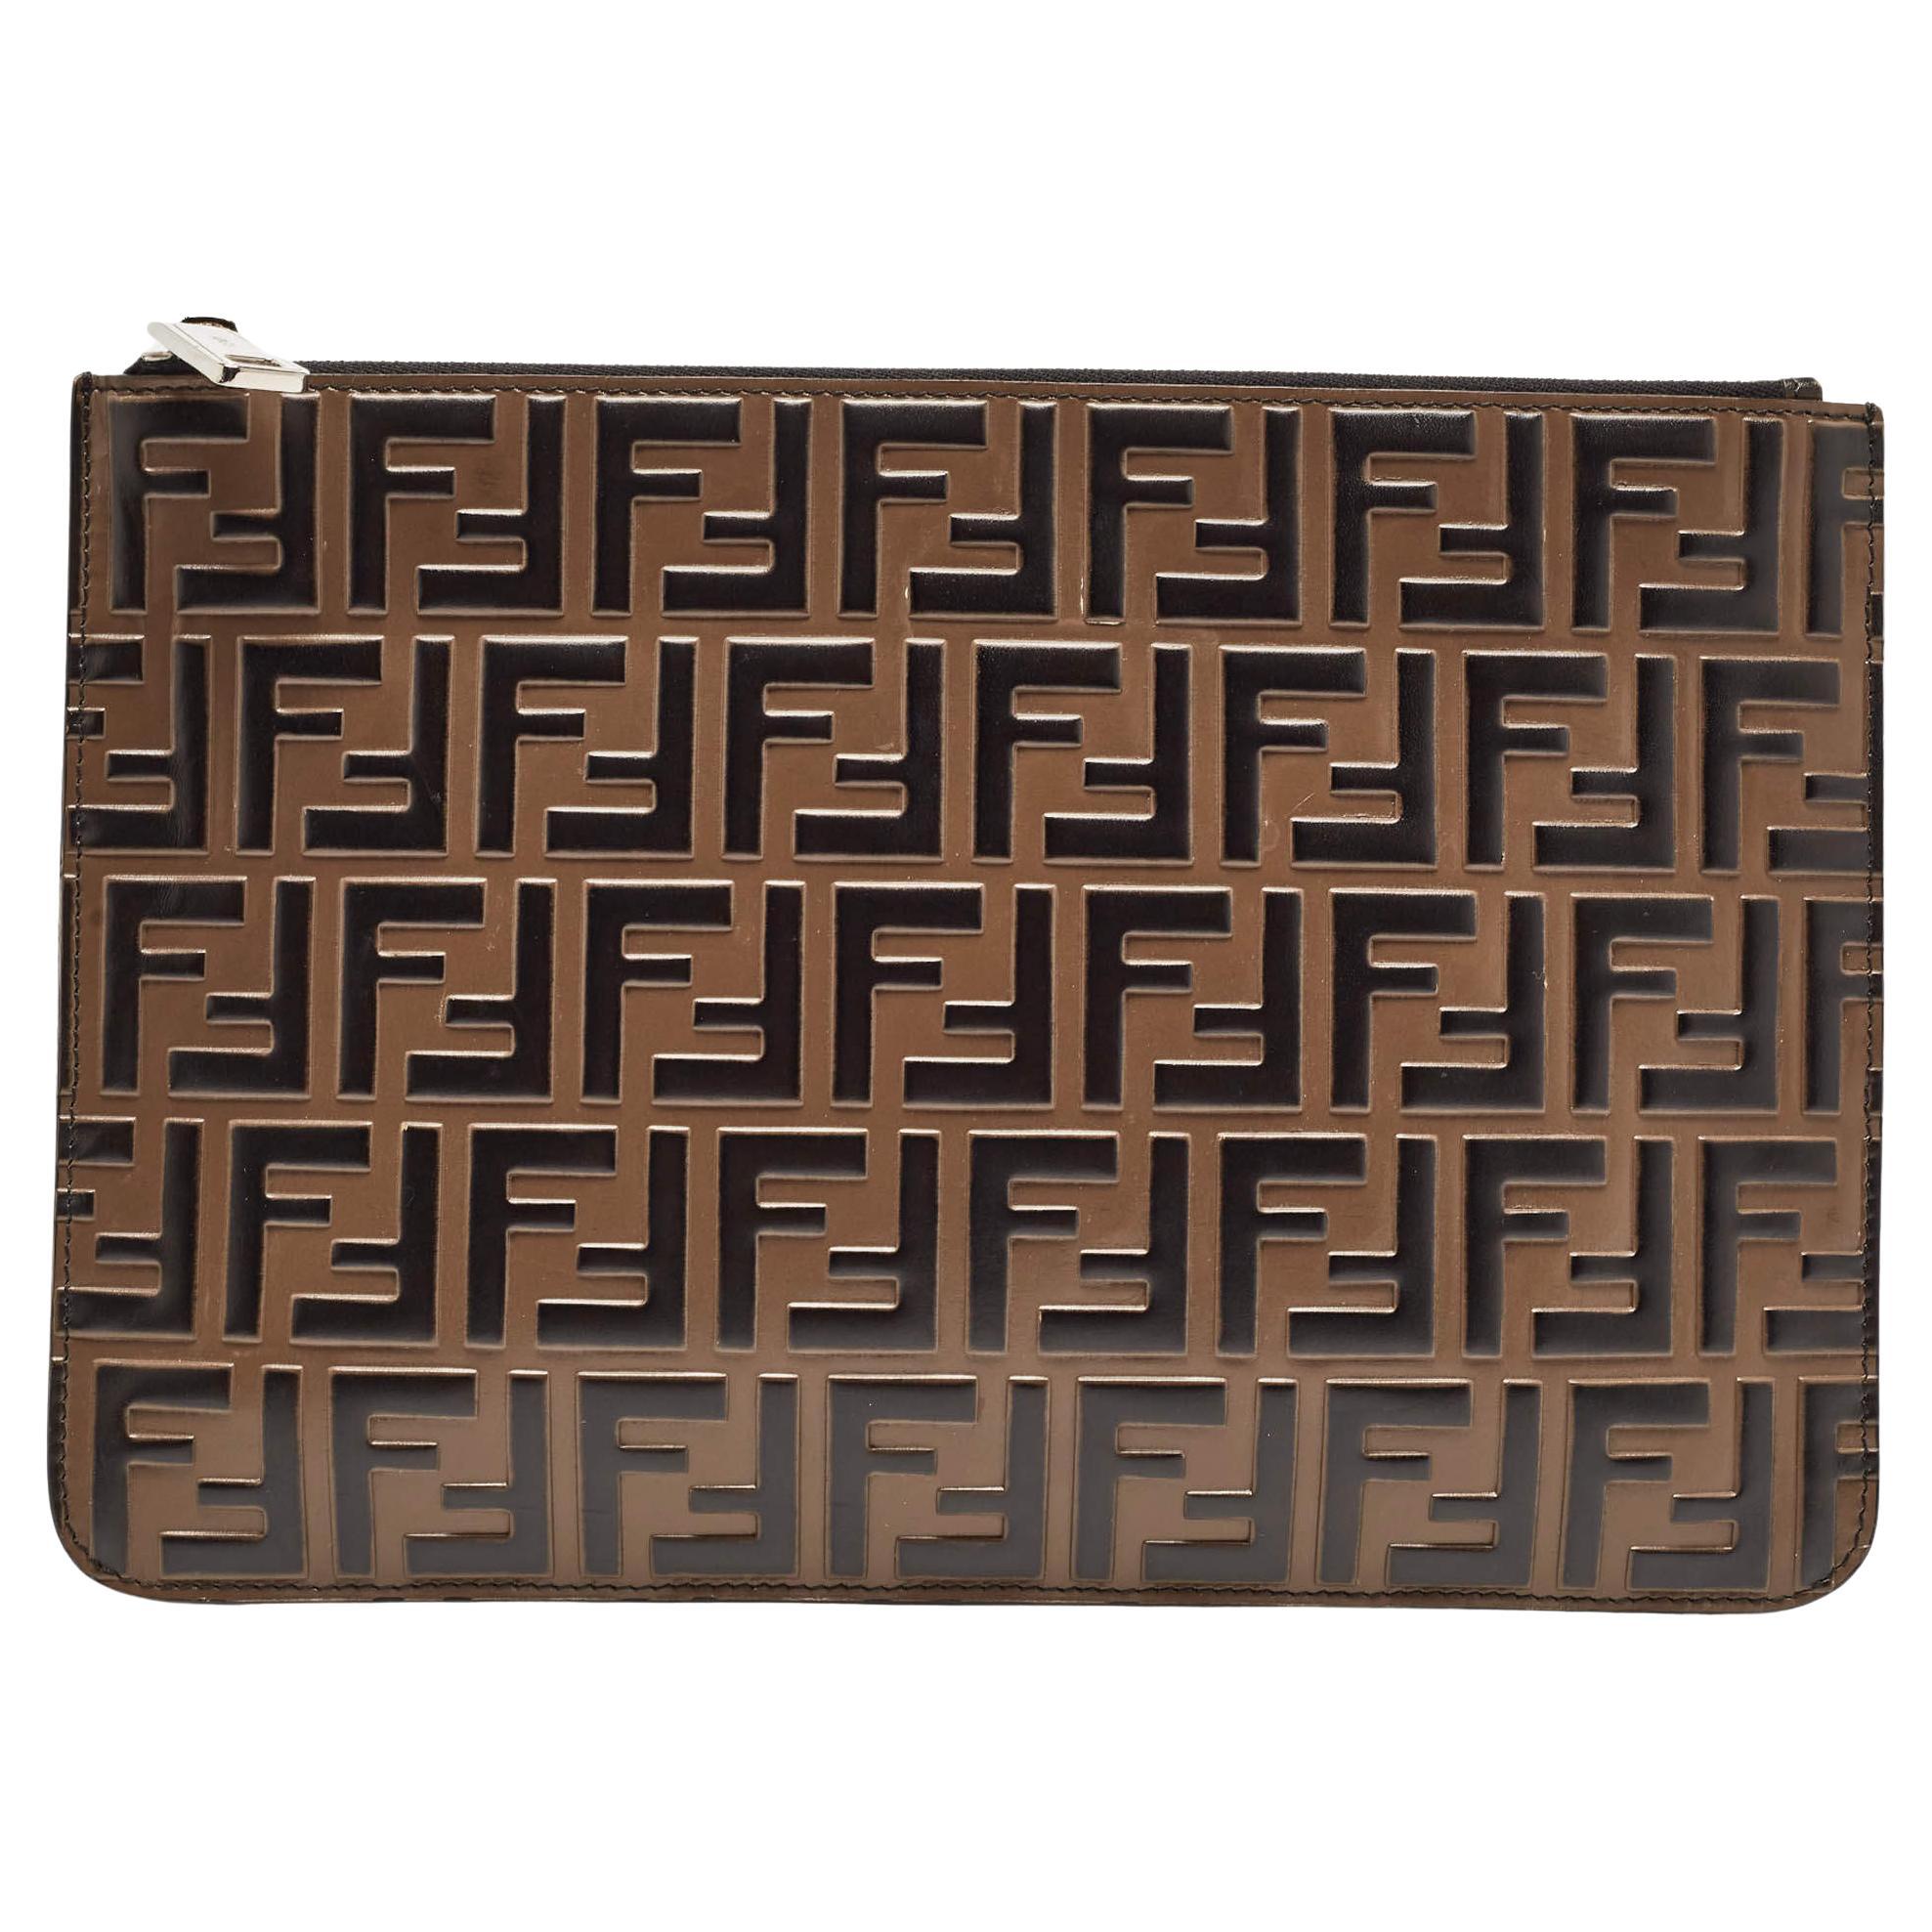 Fendi Tobacco/Black Zucca Embossed Leather Zip Pouch For Sale